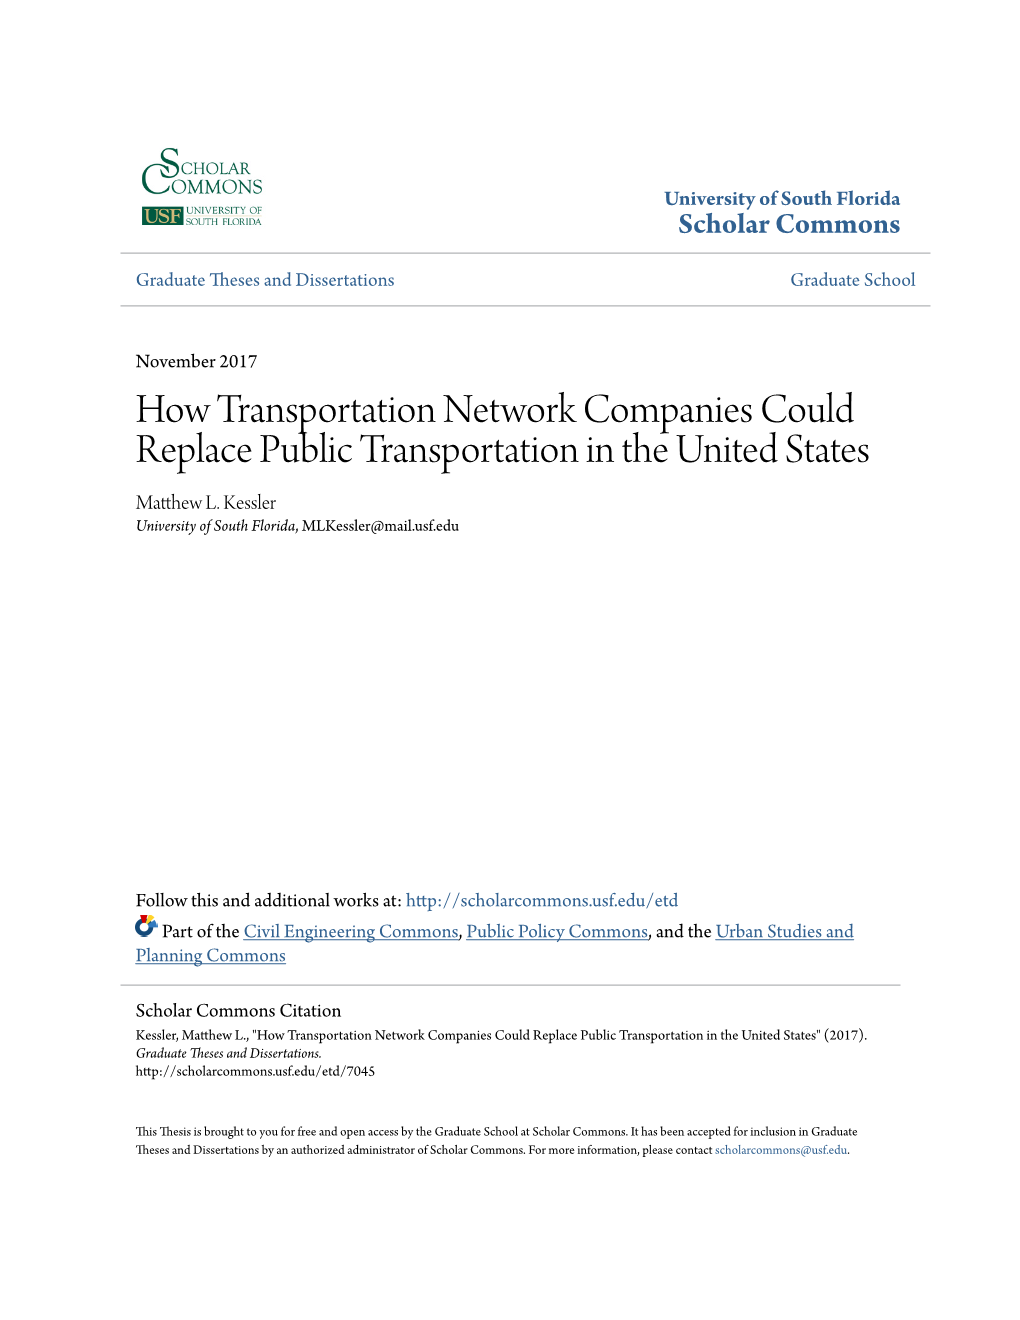 How Transportation Network Companies Could Replace Public Transportation in the United States Matthew L